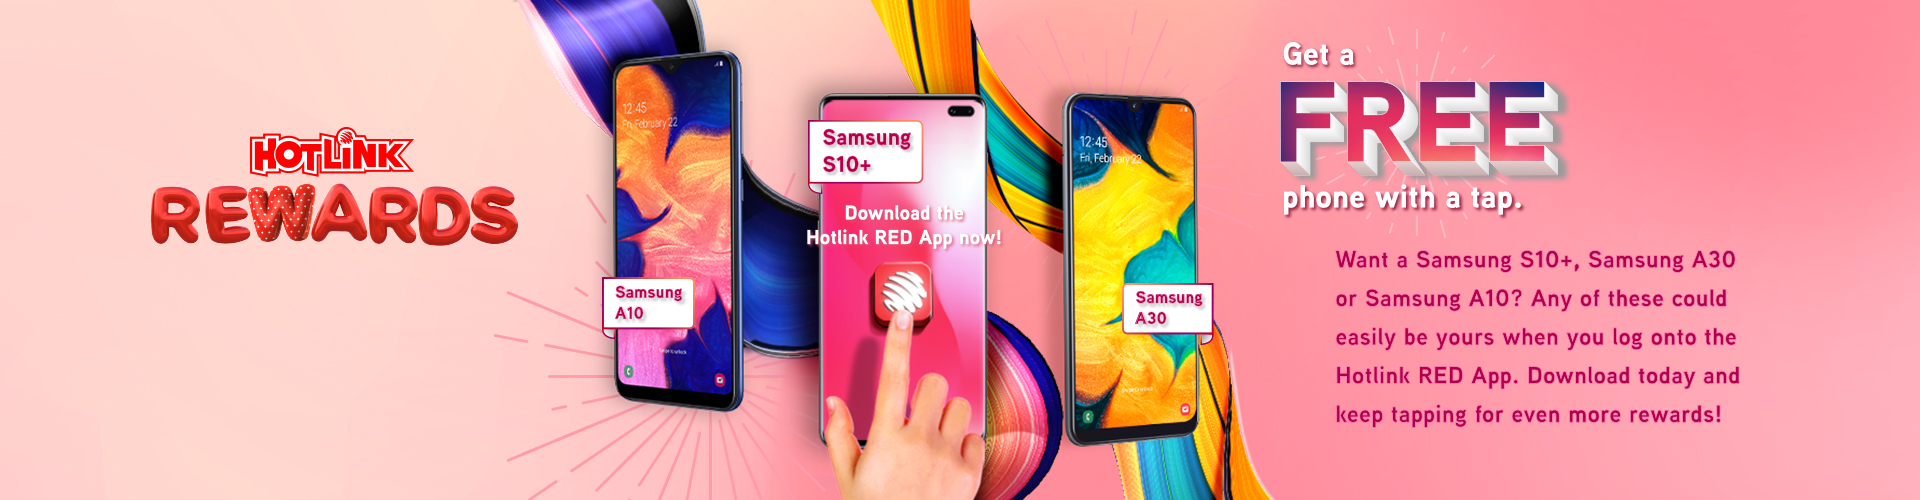 Hotlink rewards customers with a chance to win a free phone every day